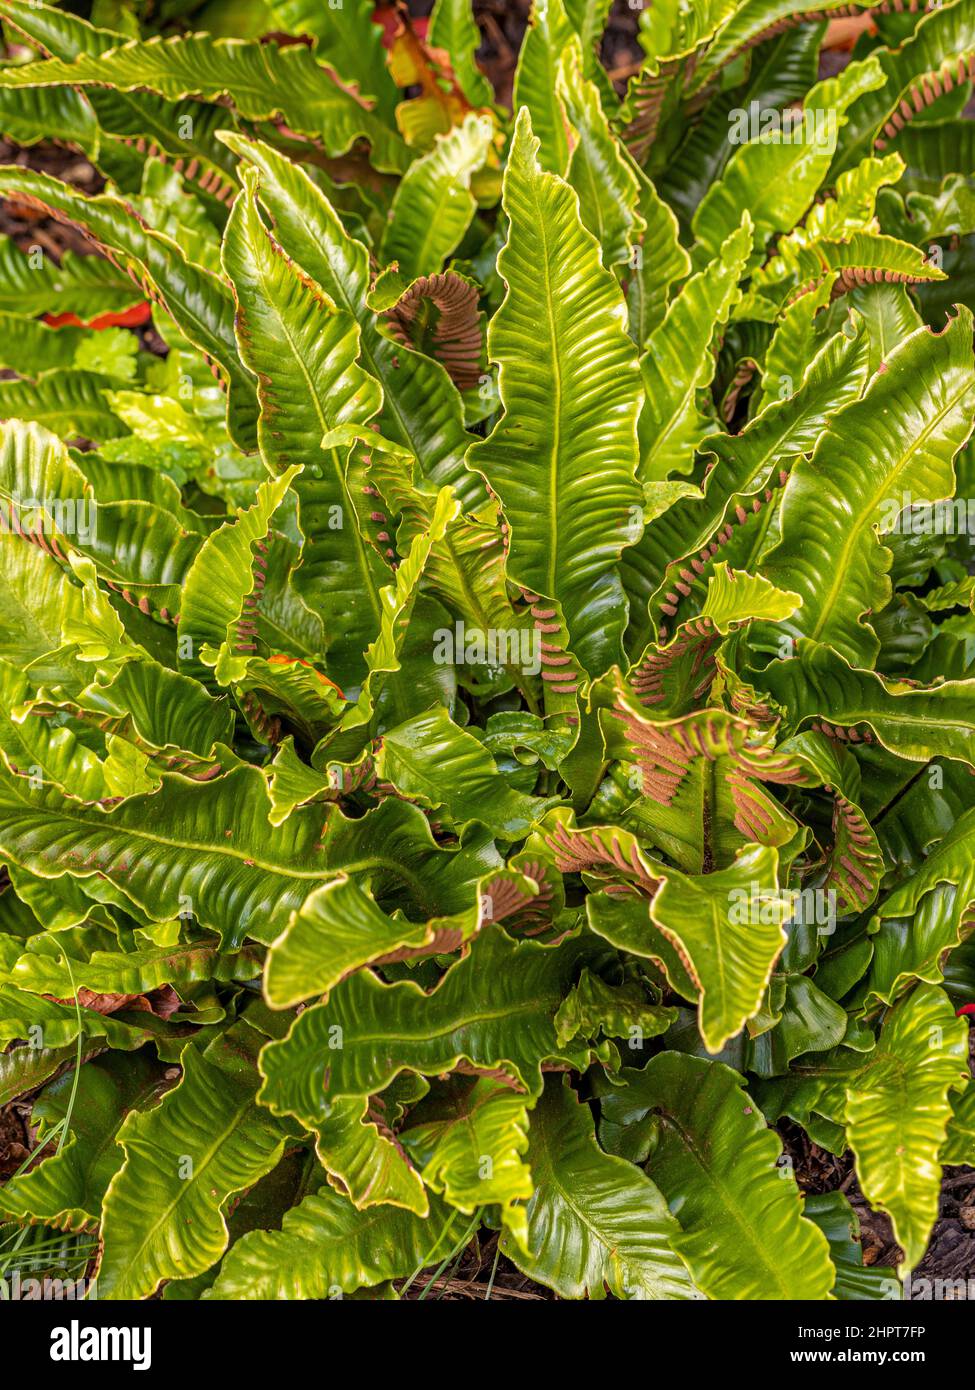 Asplenium scolopendrium commonly called hart's tongue fern growing in a UK garden. Stock Photo